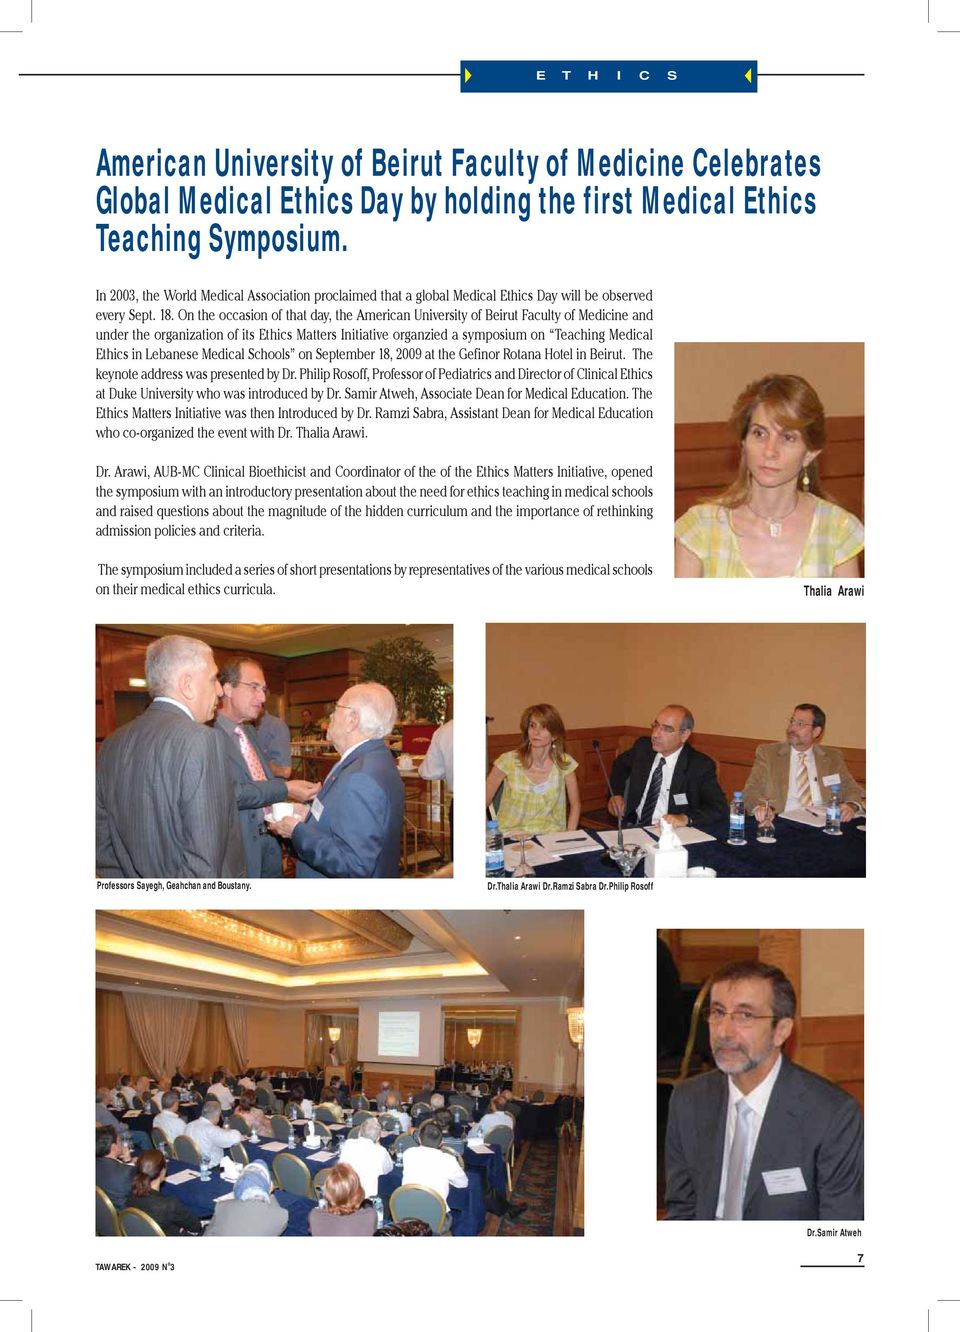 On the occasion of that day, the American University of Beirut Faculty of Medicine and under the organization of its Ethics Matters Initiative organzied a symposium on Teaching Medical Ethics in